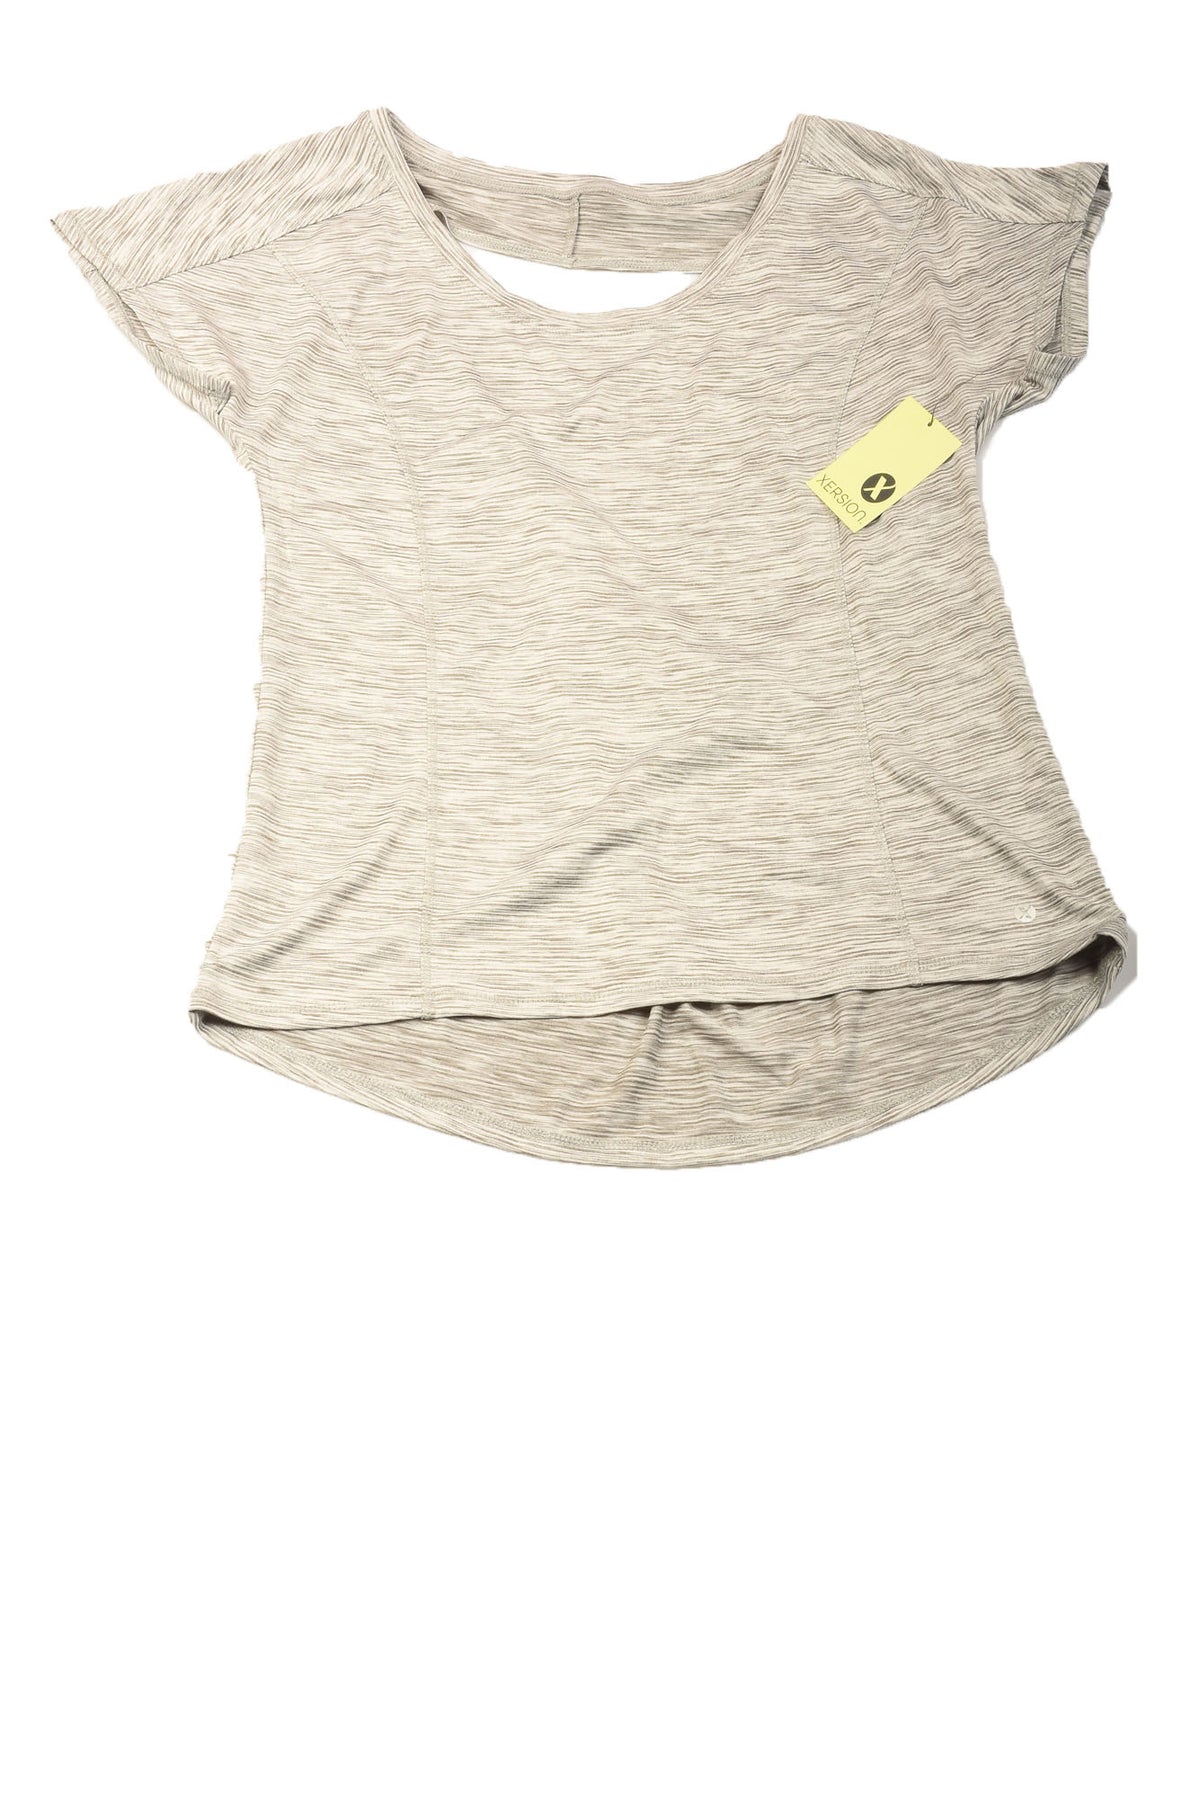 Women's Activewear Top By Xersion